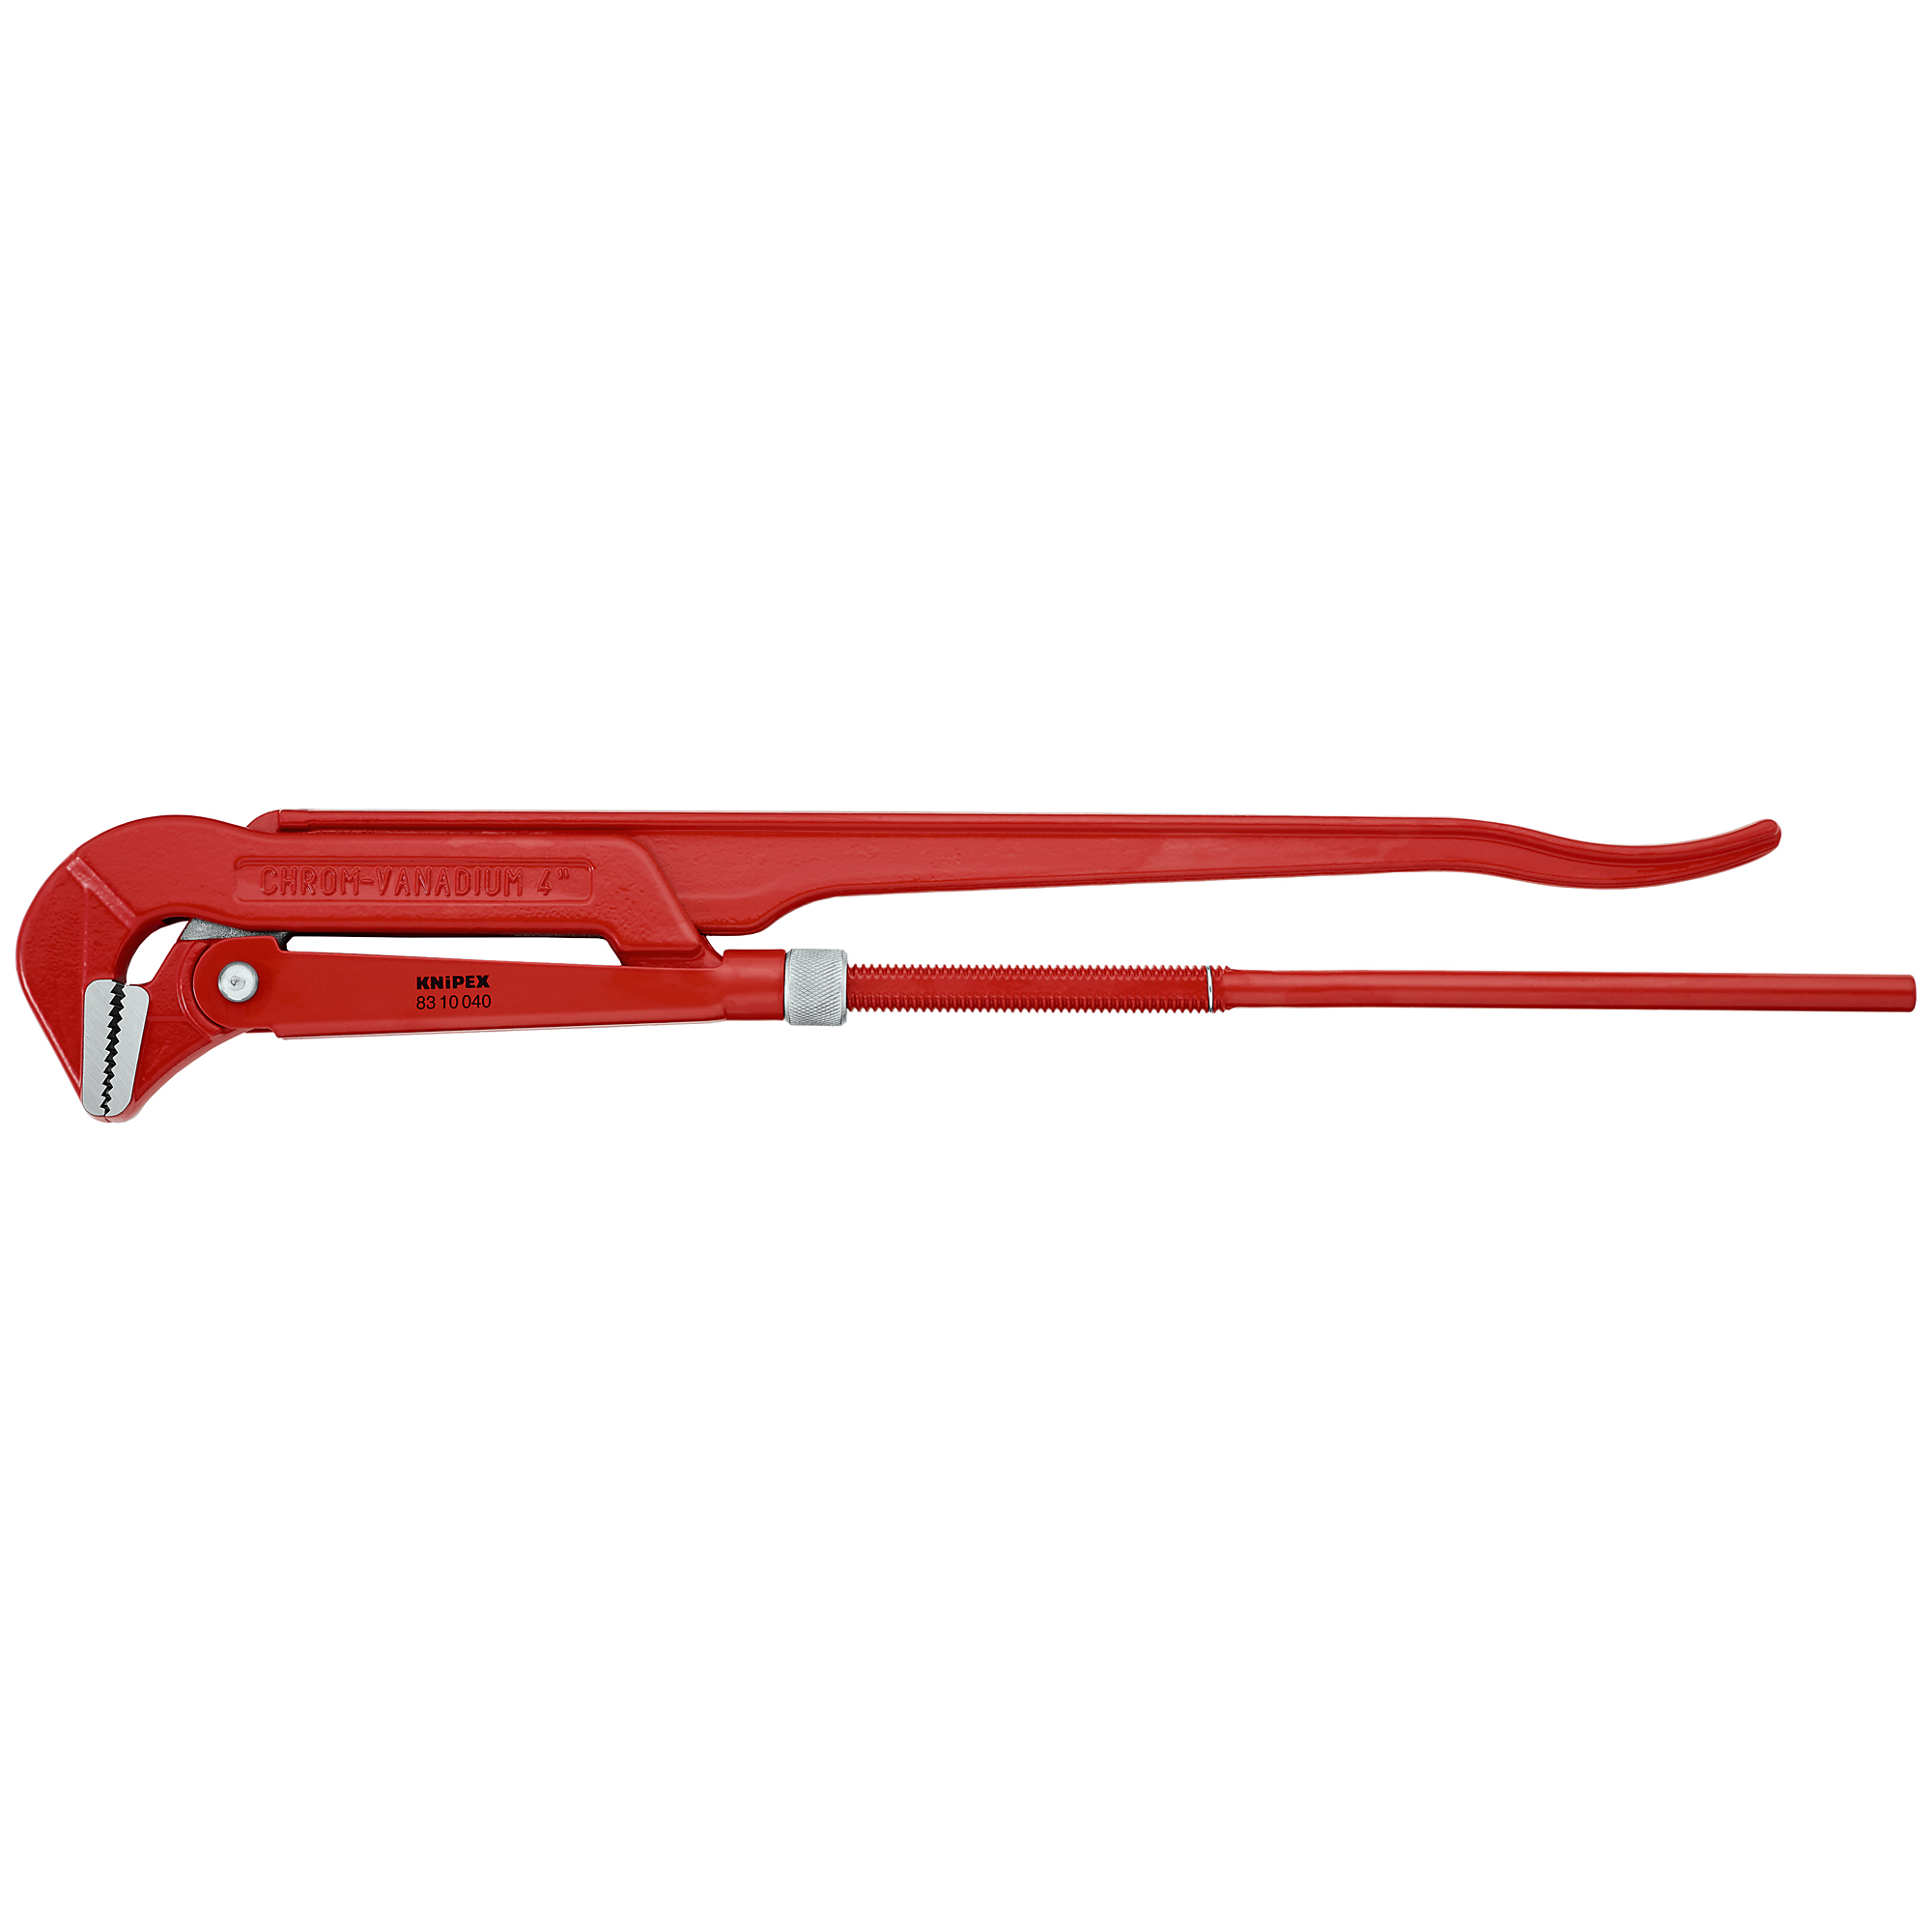 KNIPEX, Swedish Pipe Wrench-90Â°, 29.25Inch, Pieces (qty.) 1 Material Steel, Jaw Capacity 5.125 in, Model 83 10 040